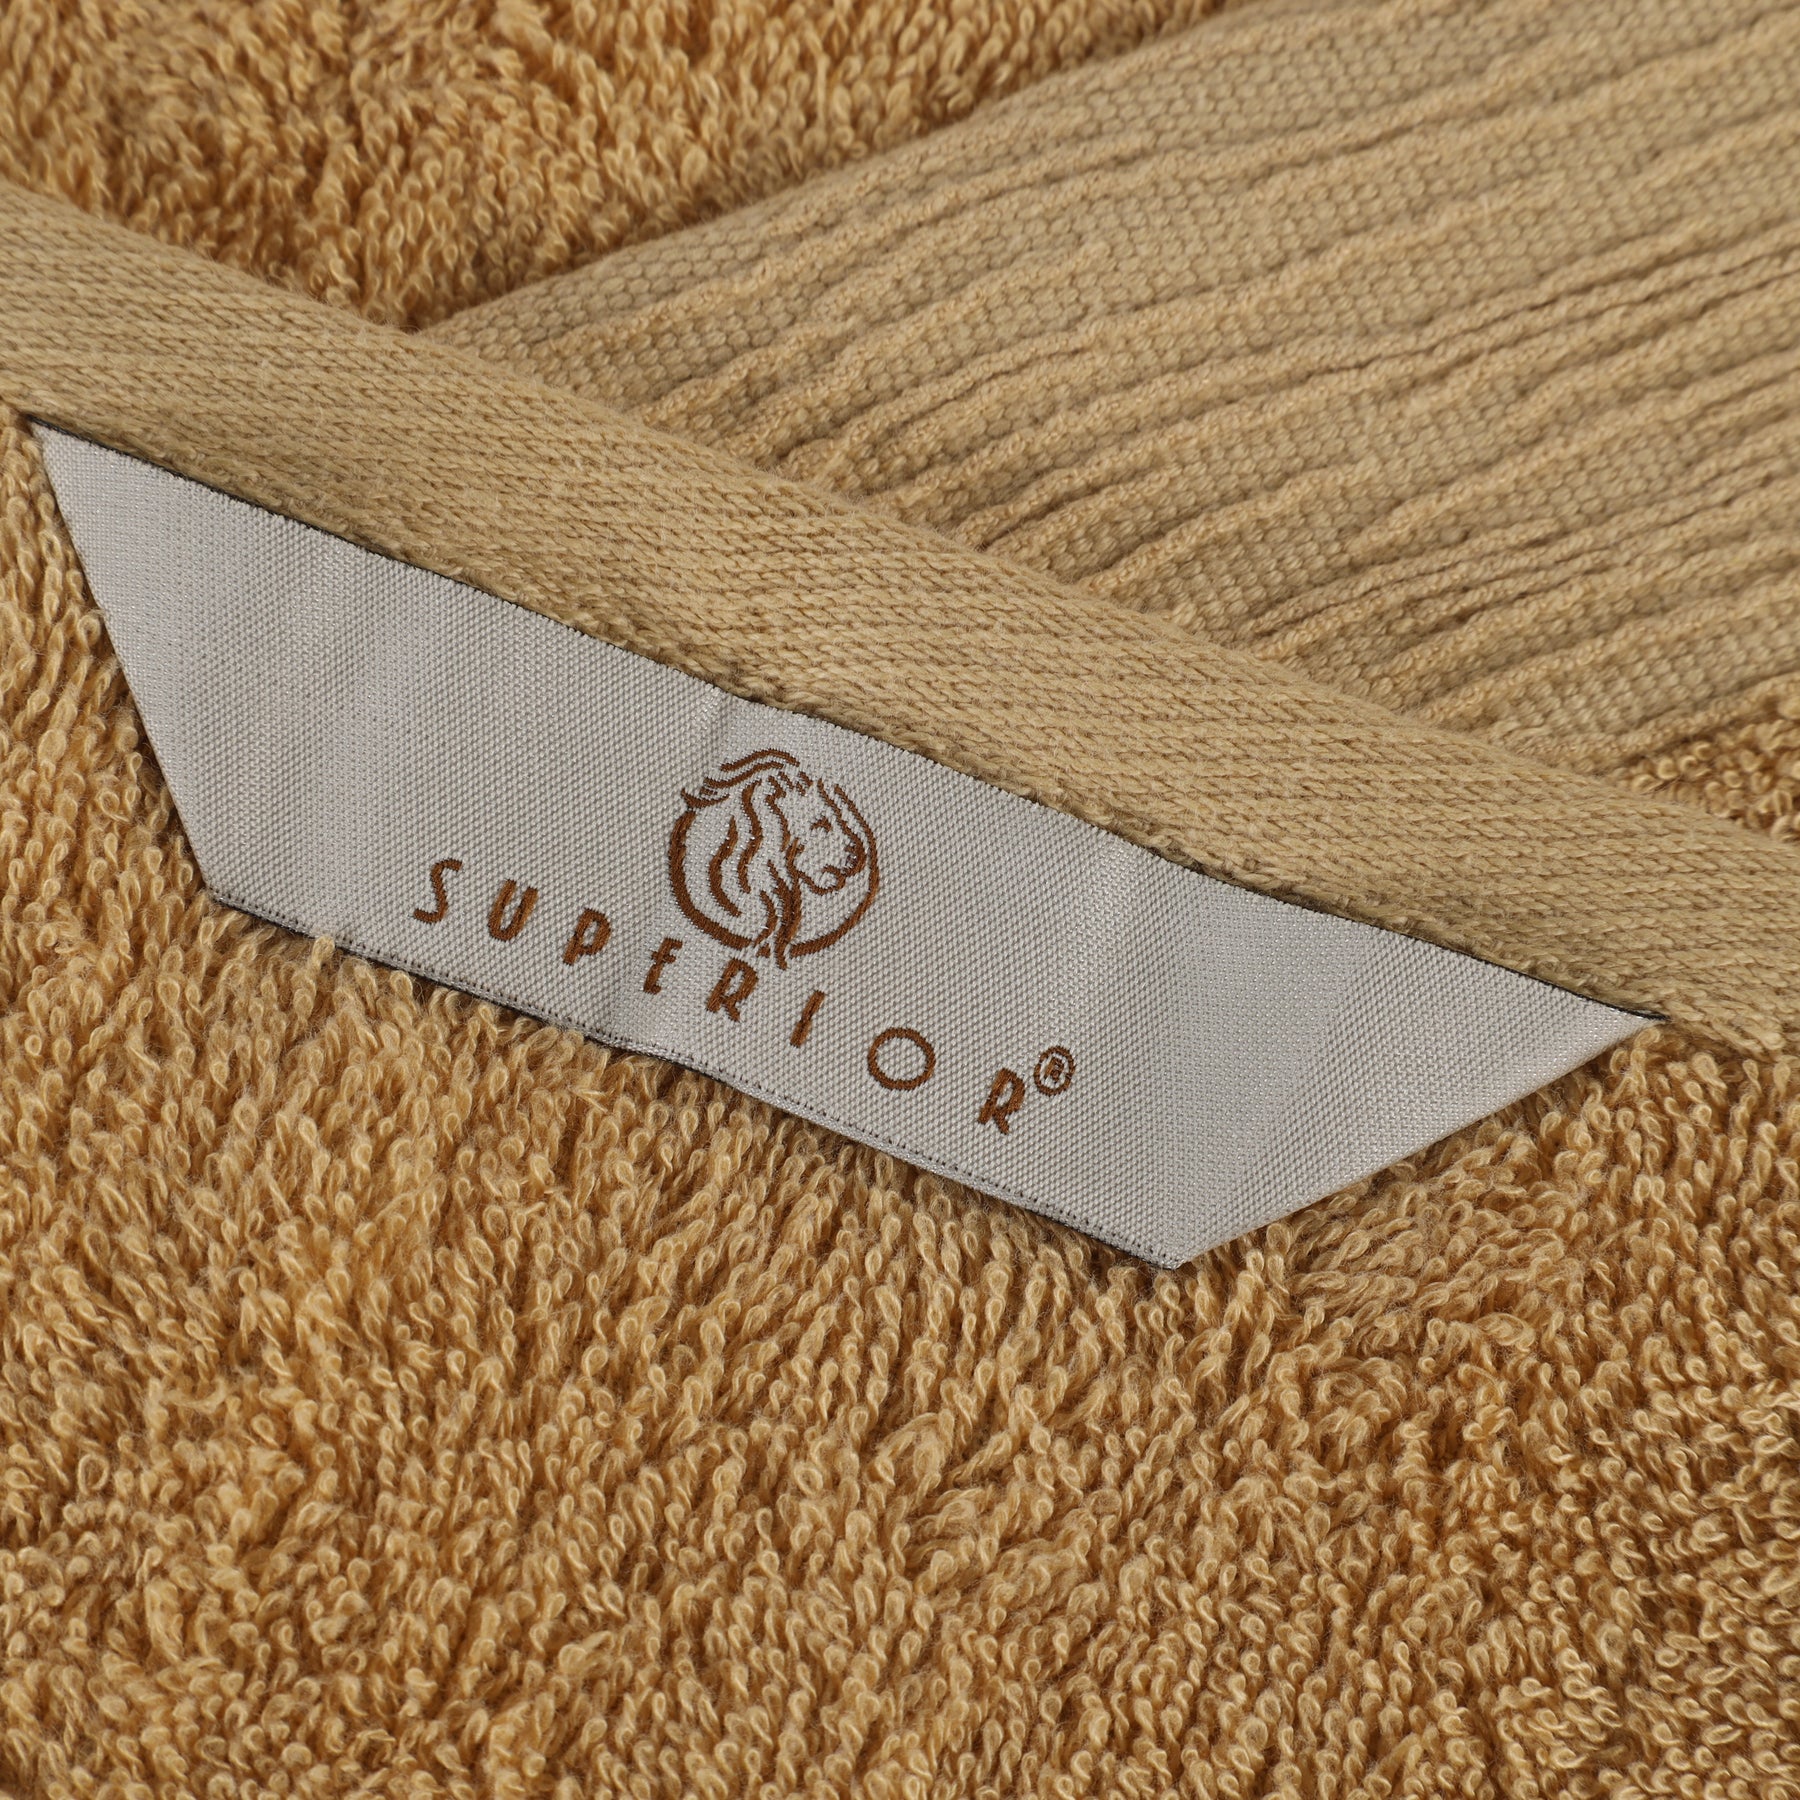 Rayon from Bamboo Eco-Friendly Fluffy Solid Hand Towel - Gold